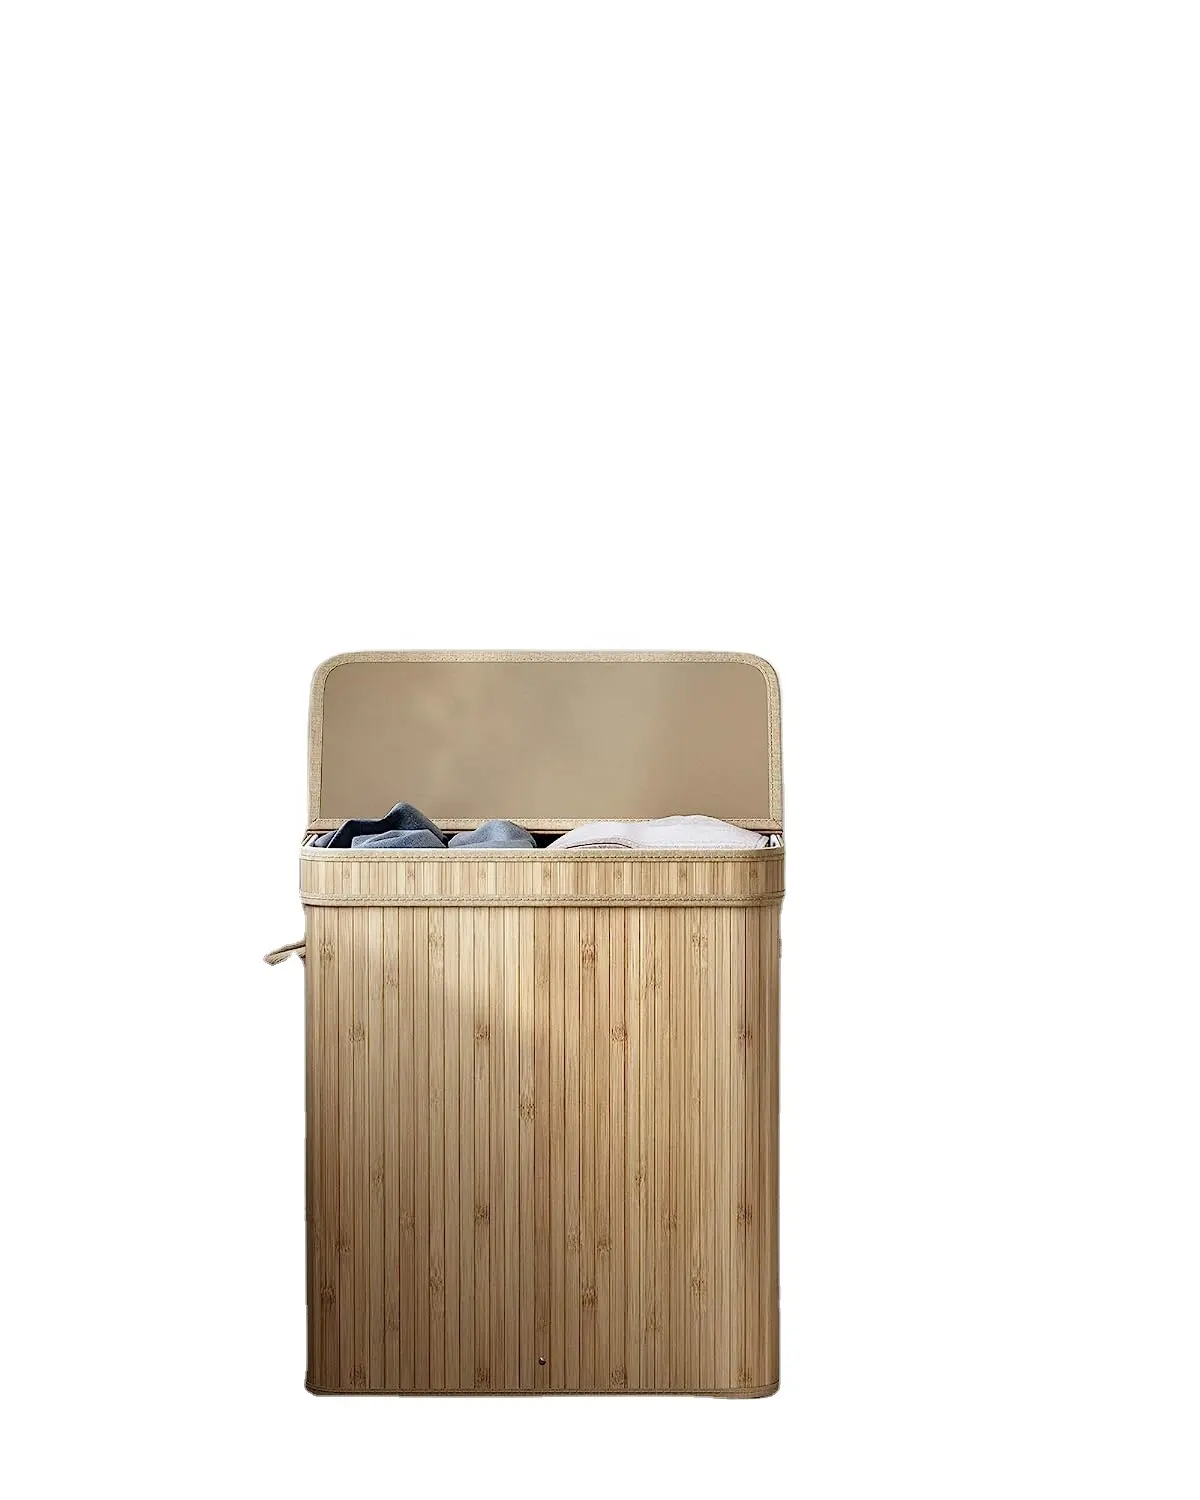 XL Collapsible Bamboo Laundry Baskets Foldable Storage Hamper with Removable Washable Lining